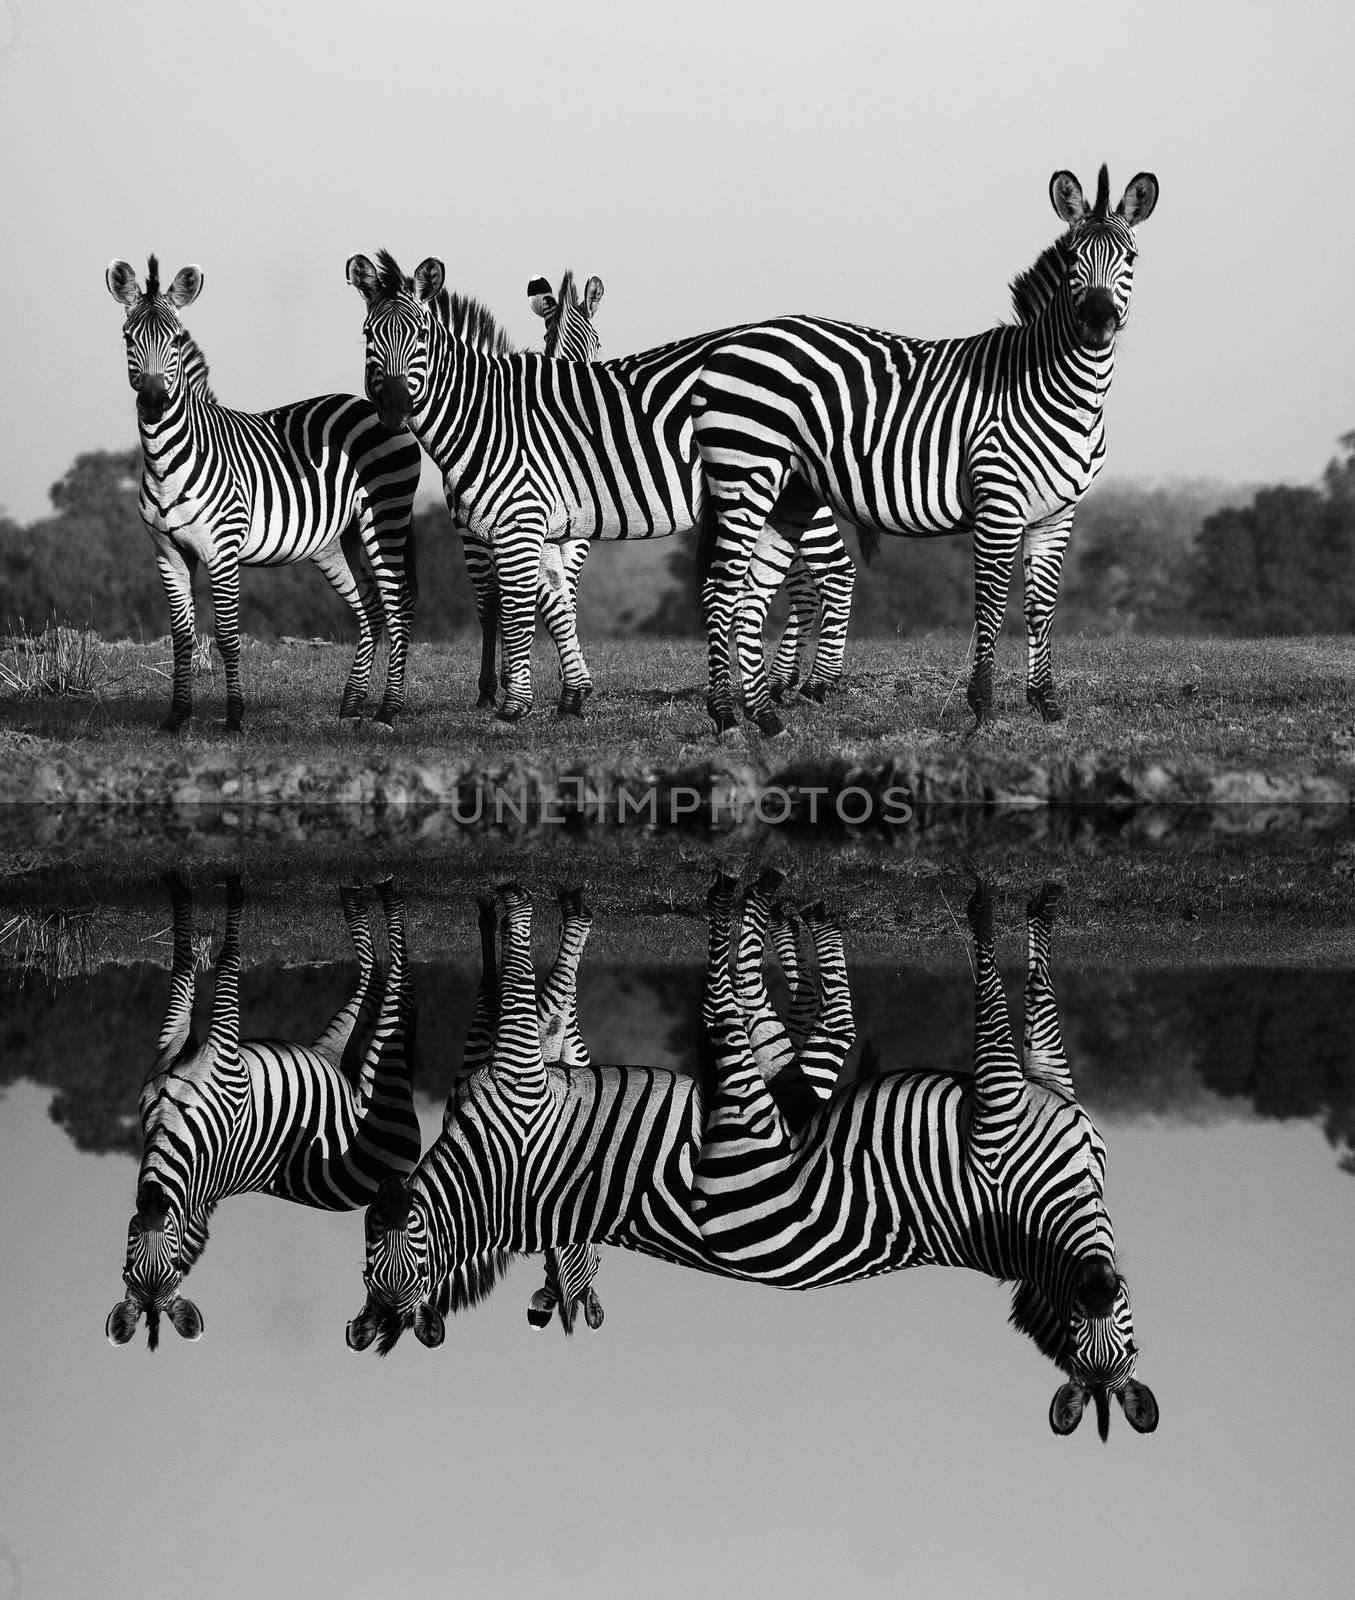 Herd of Zebras with a Reflection on the water